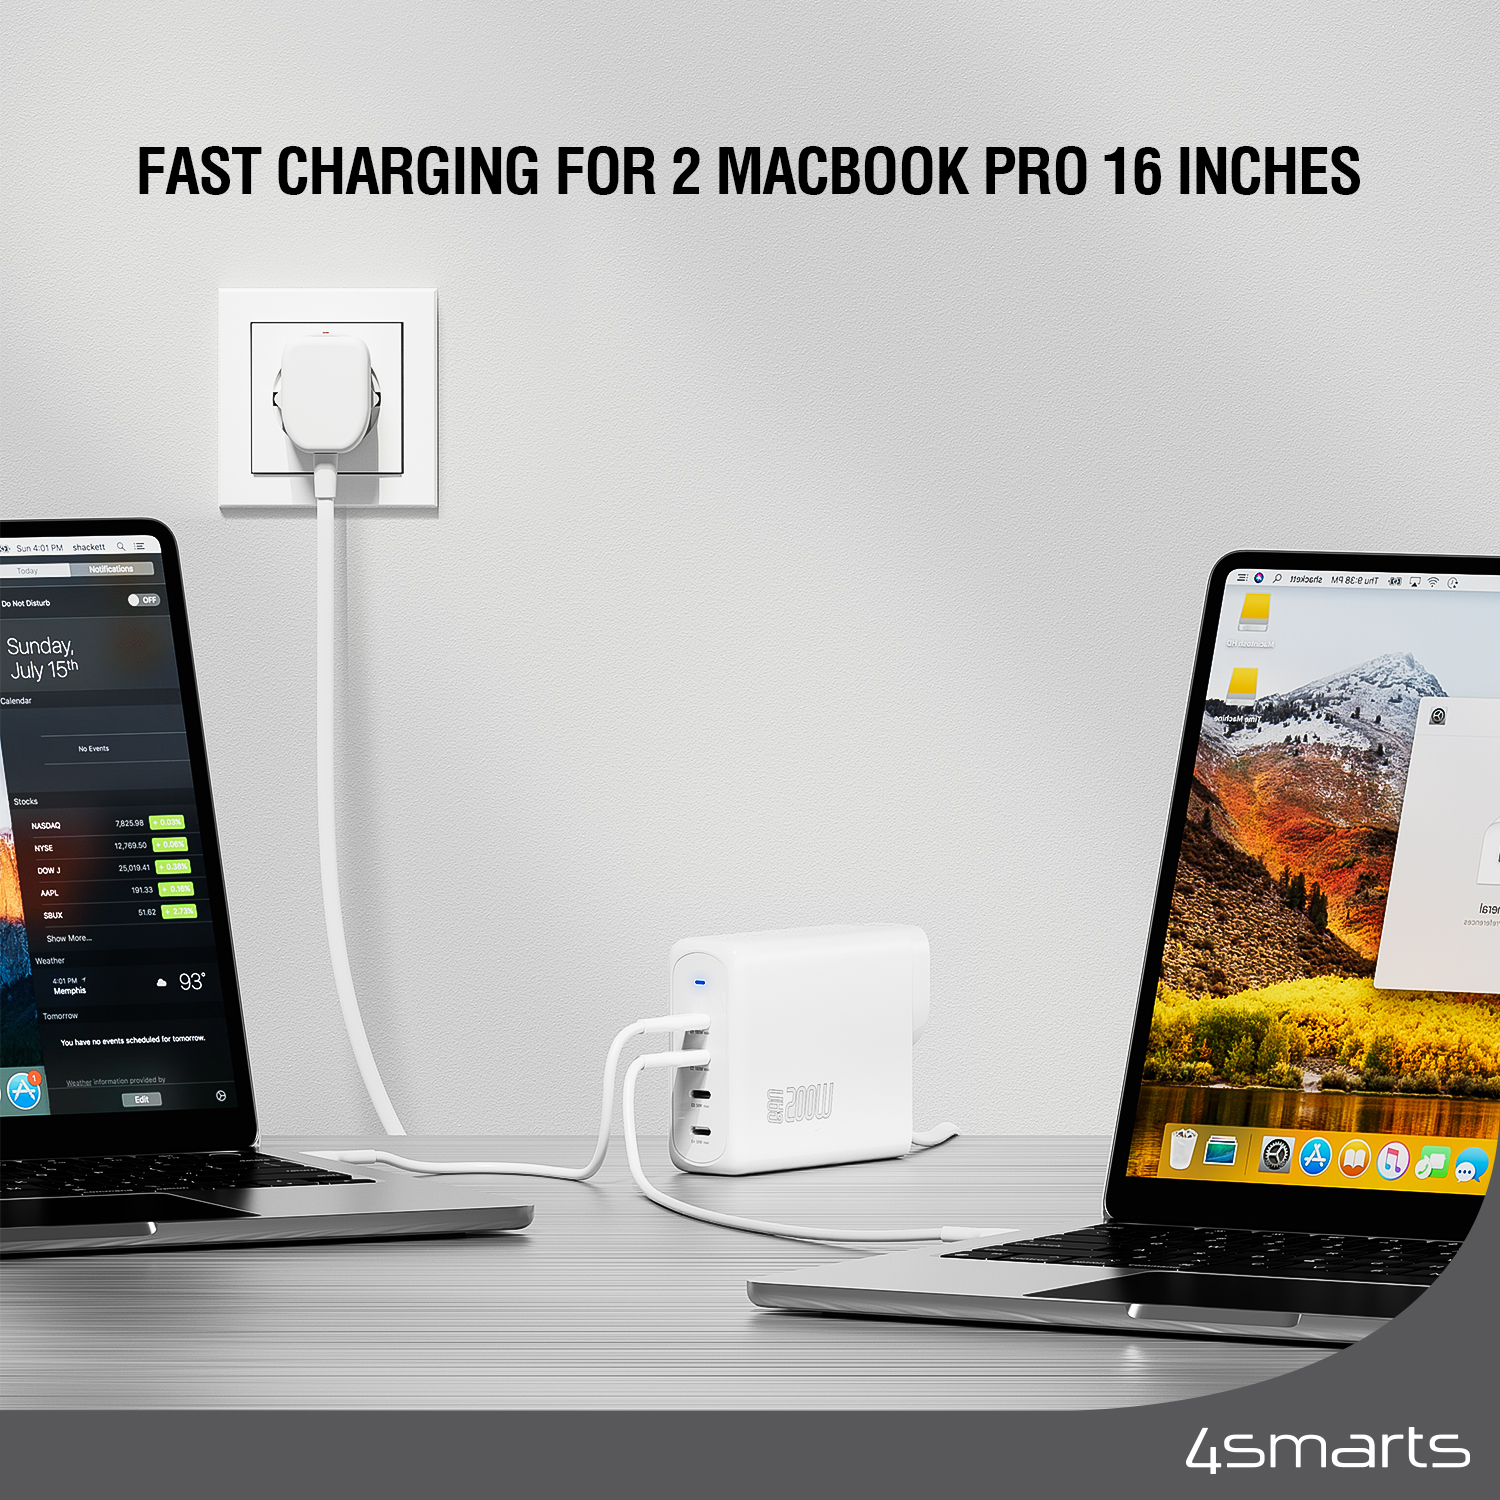 The 200W USB C power bank from 4smarts charges two MacBook Pro devices simultaneously at full speed with 100W each.